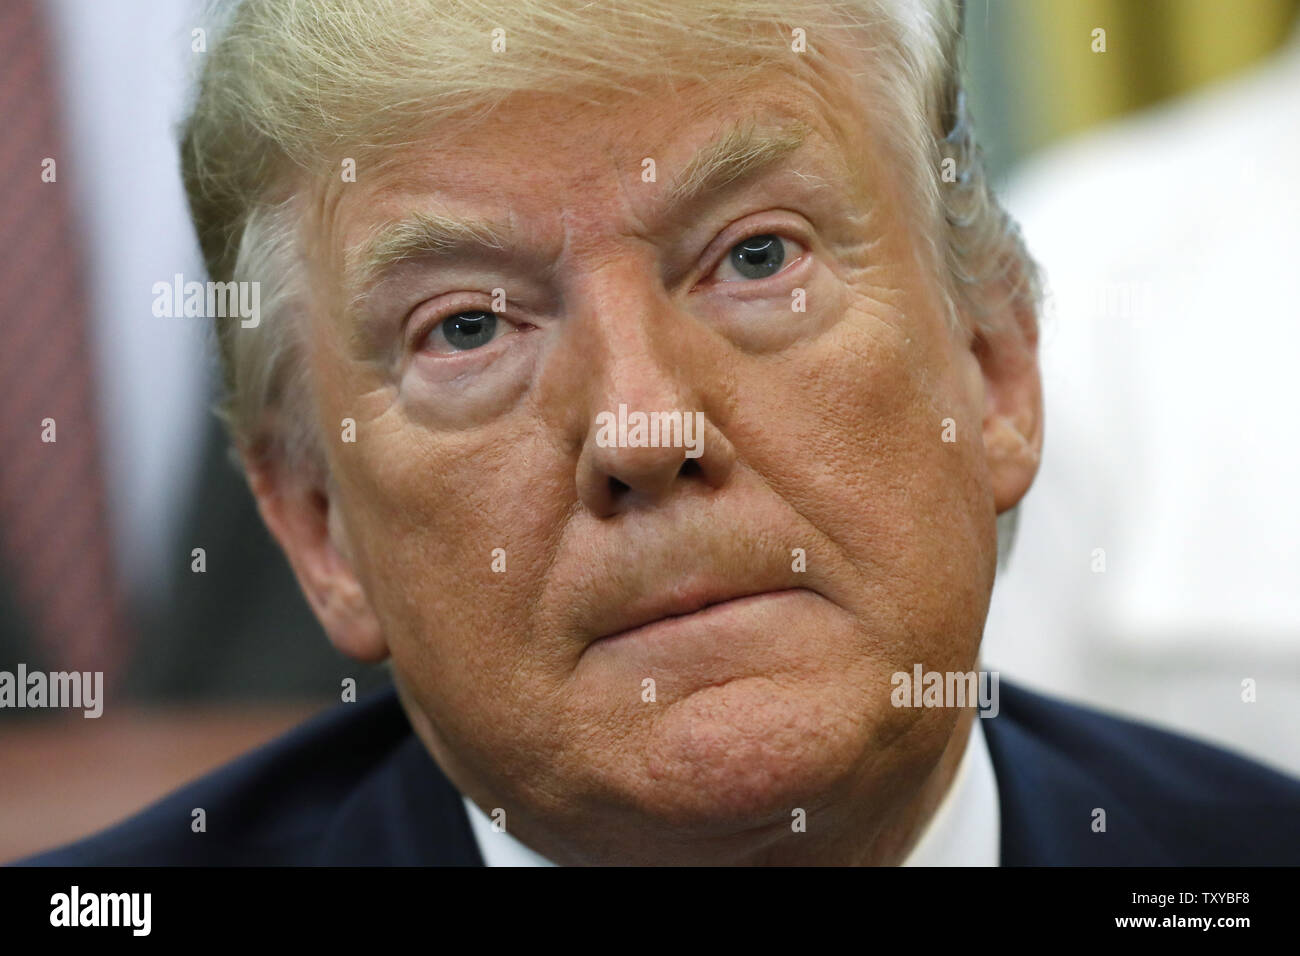 Washington, District of Columbia, USA. 25th June, 2019. US President Donald Trump talks to the media after signing an Executive Order Establishing a White House Council on Eliminating Regulatory Barriers to Affordable Housing in the Oval Office at the White House in Washington, DC, on June 25, 2019. Credit: Yuri Gripas/Pool via CNP Credit: Yuri Gripas/CNP/ZUMA Wire/Alamy Live News Stock Photo